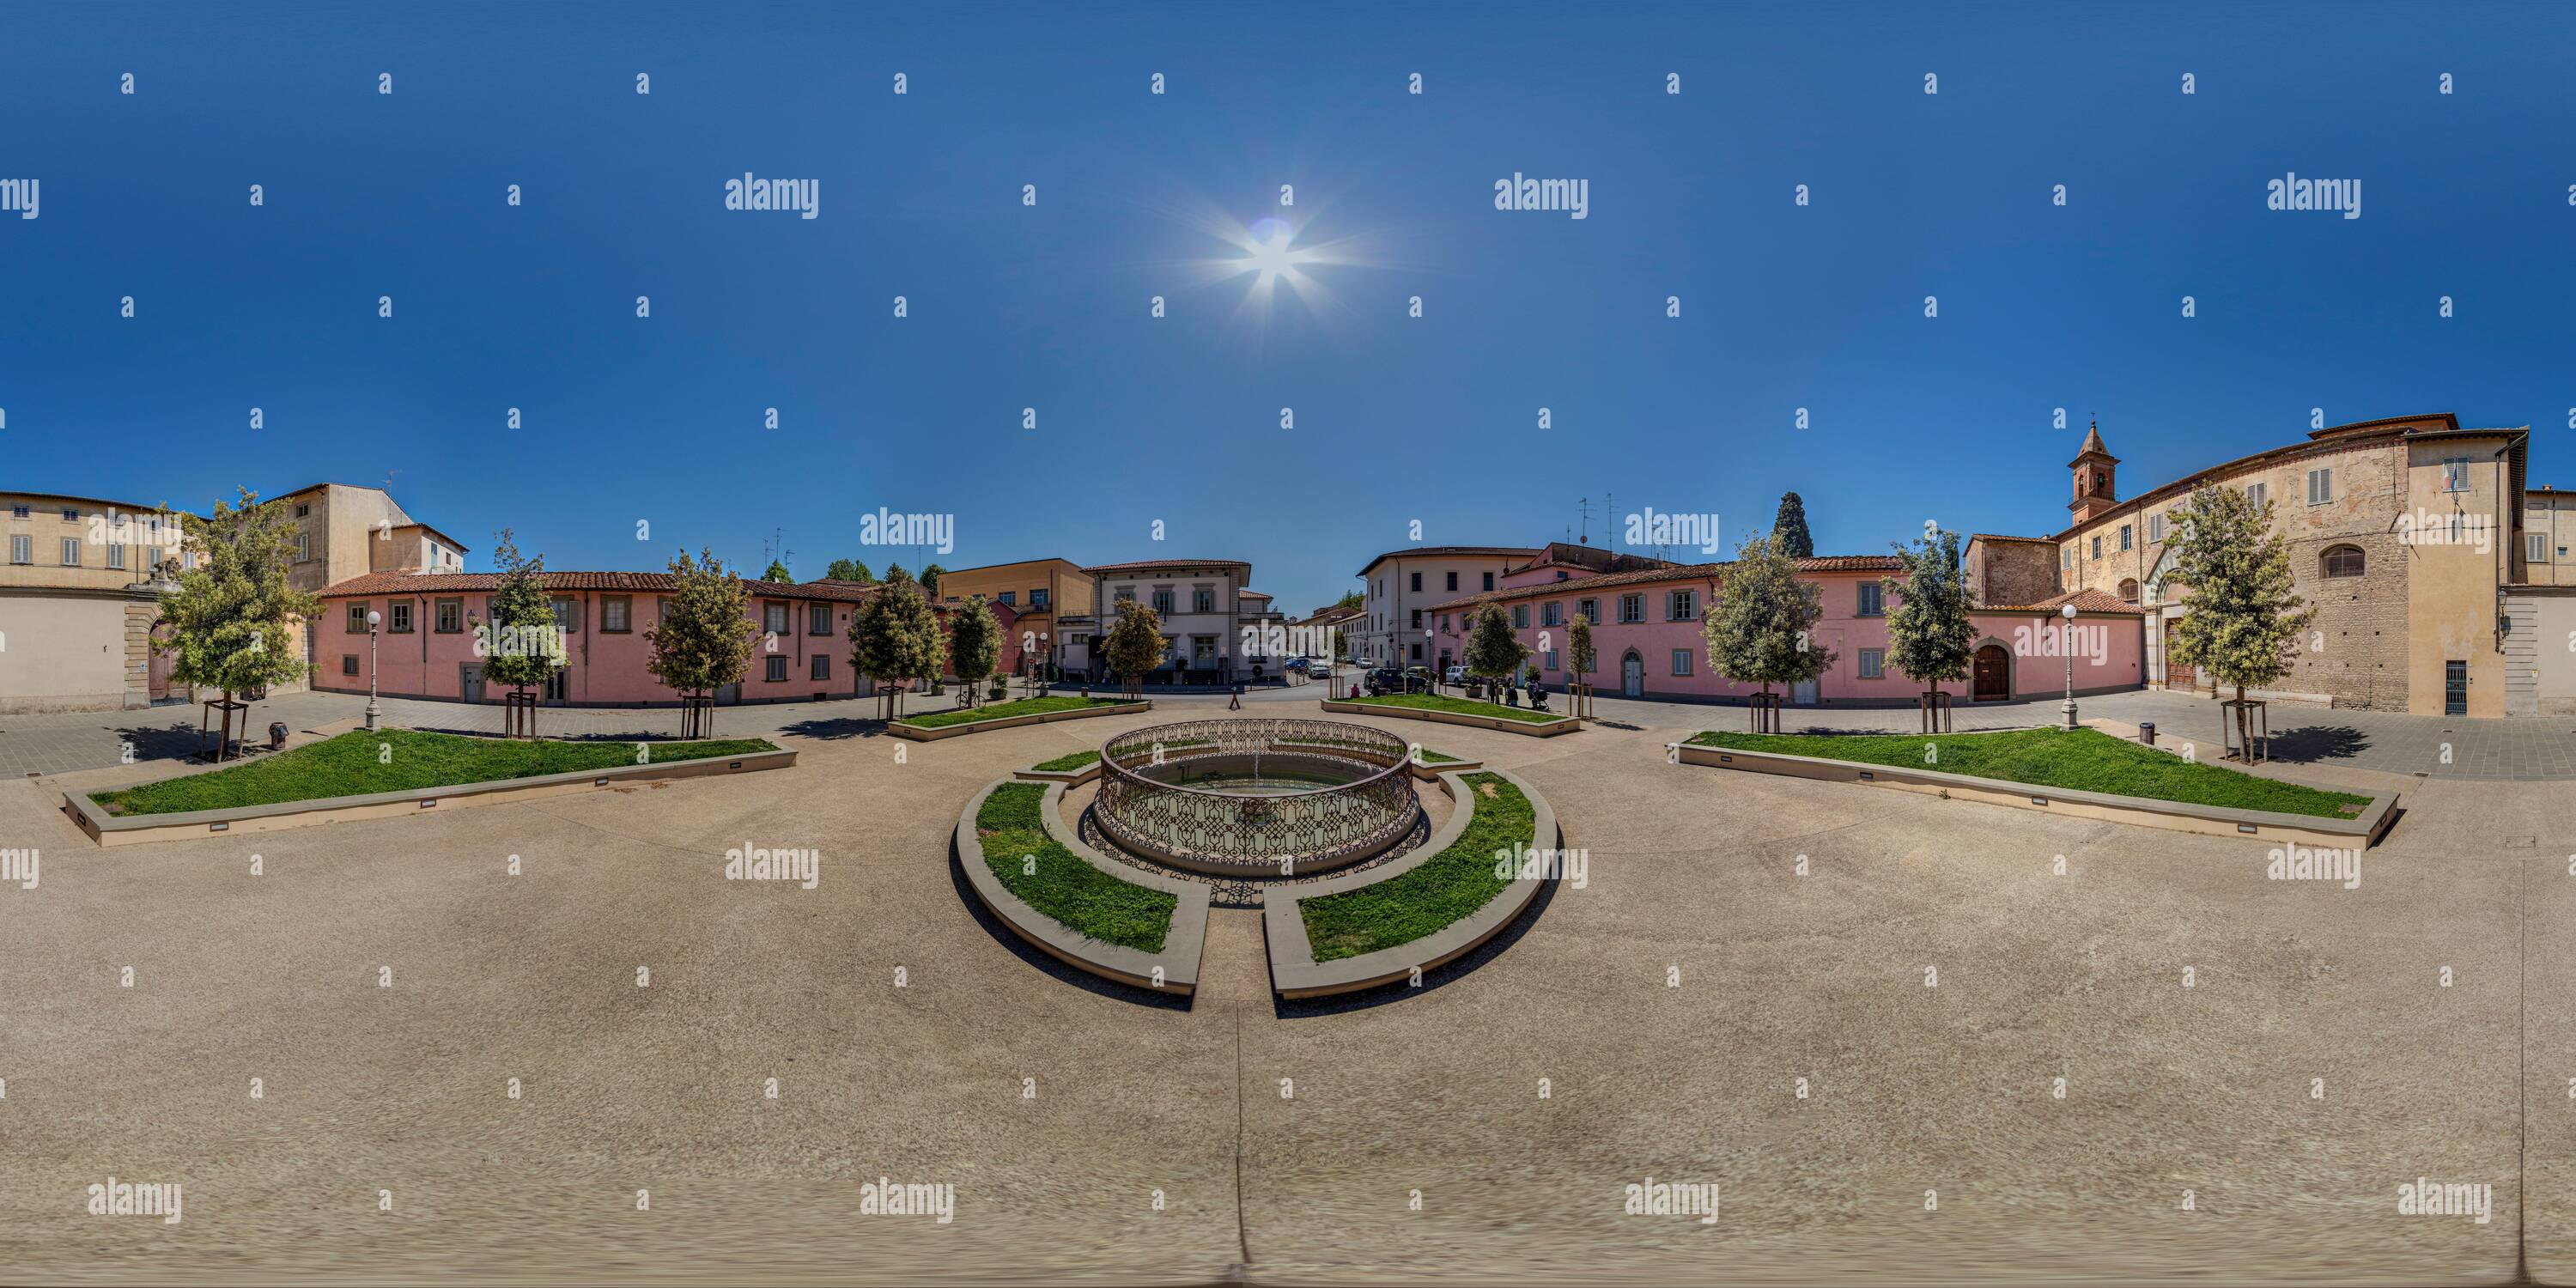 360 degree panoramic view of An unusual and never-before-seen Prato. Spectacular and empty while at the same time, alive and poignant in the 360-degrees images.